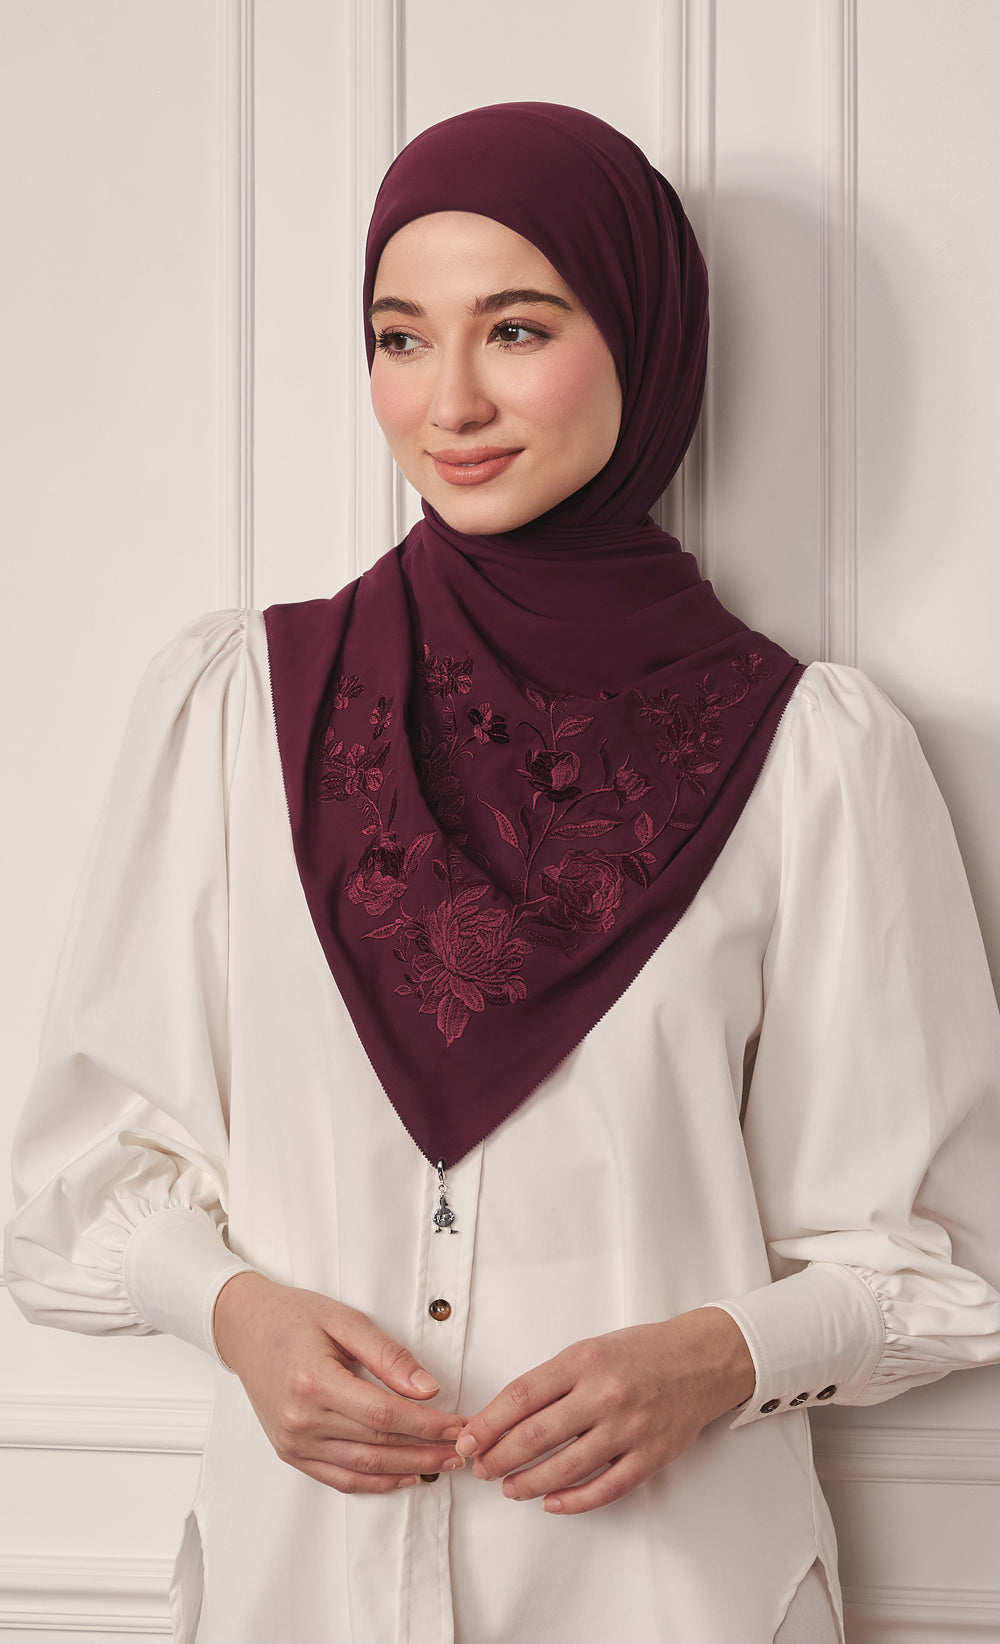 The Peonies Embroidery dUCk Square Scarf in Maroon